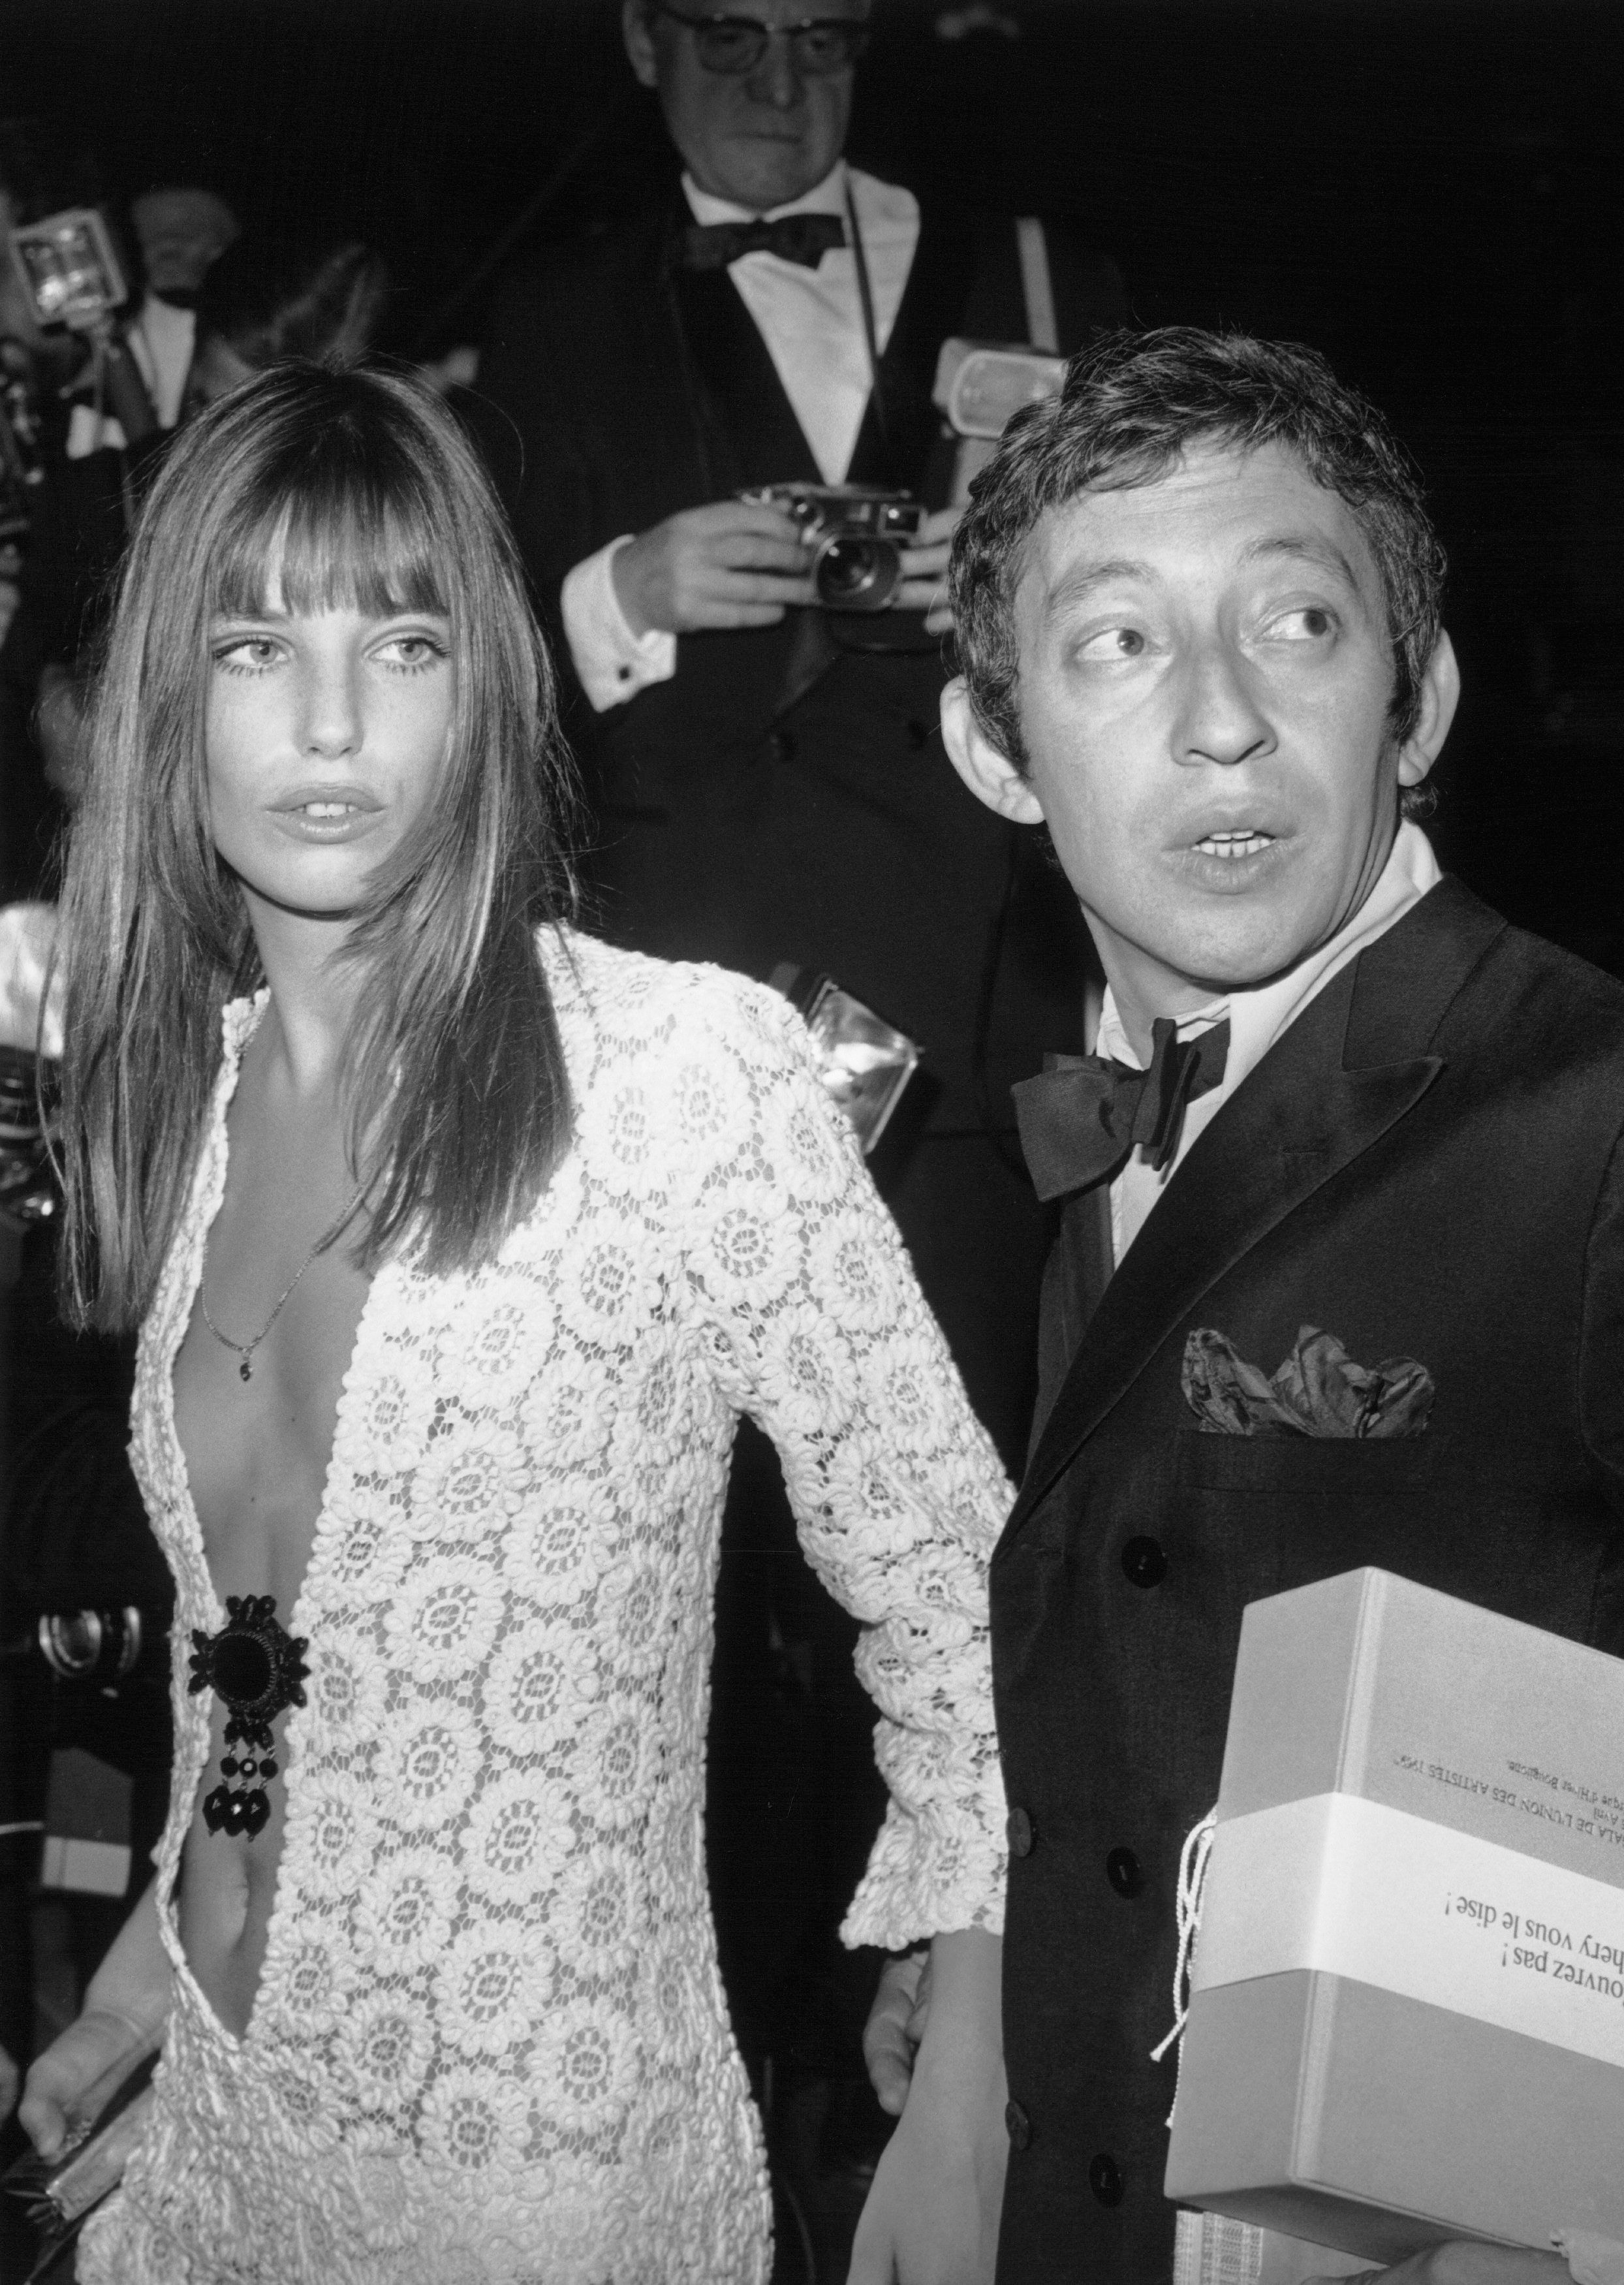 Jane Birkin, style icon and Hermès muse, has died